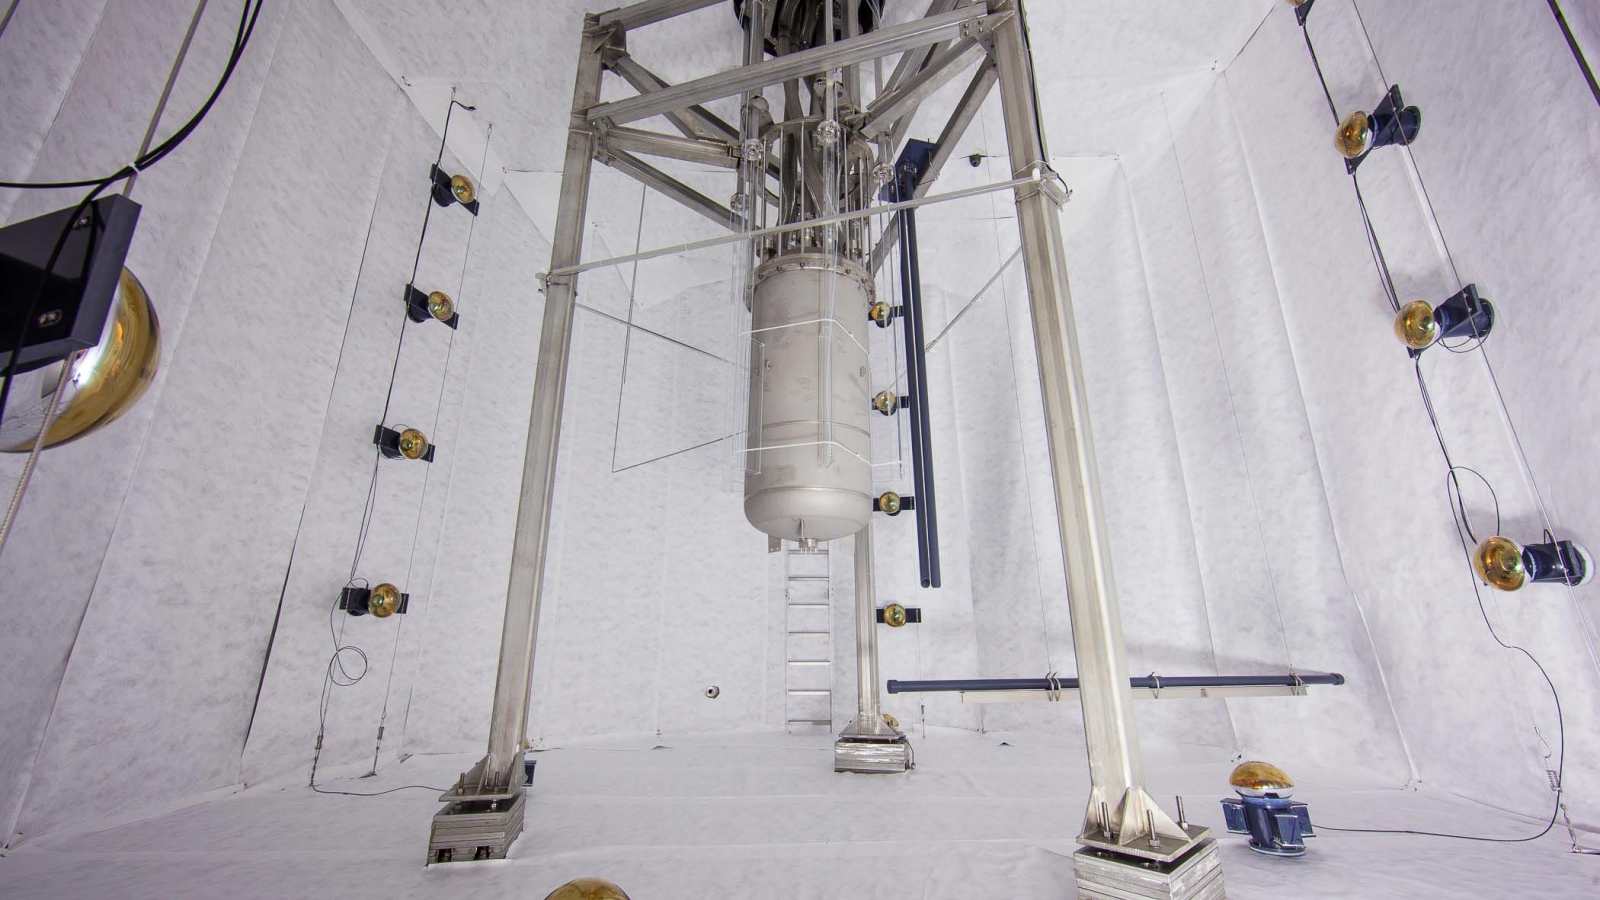 The LUX dark matter detector seen here suspended in its protective water tank, before water is added.